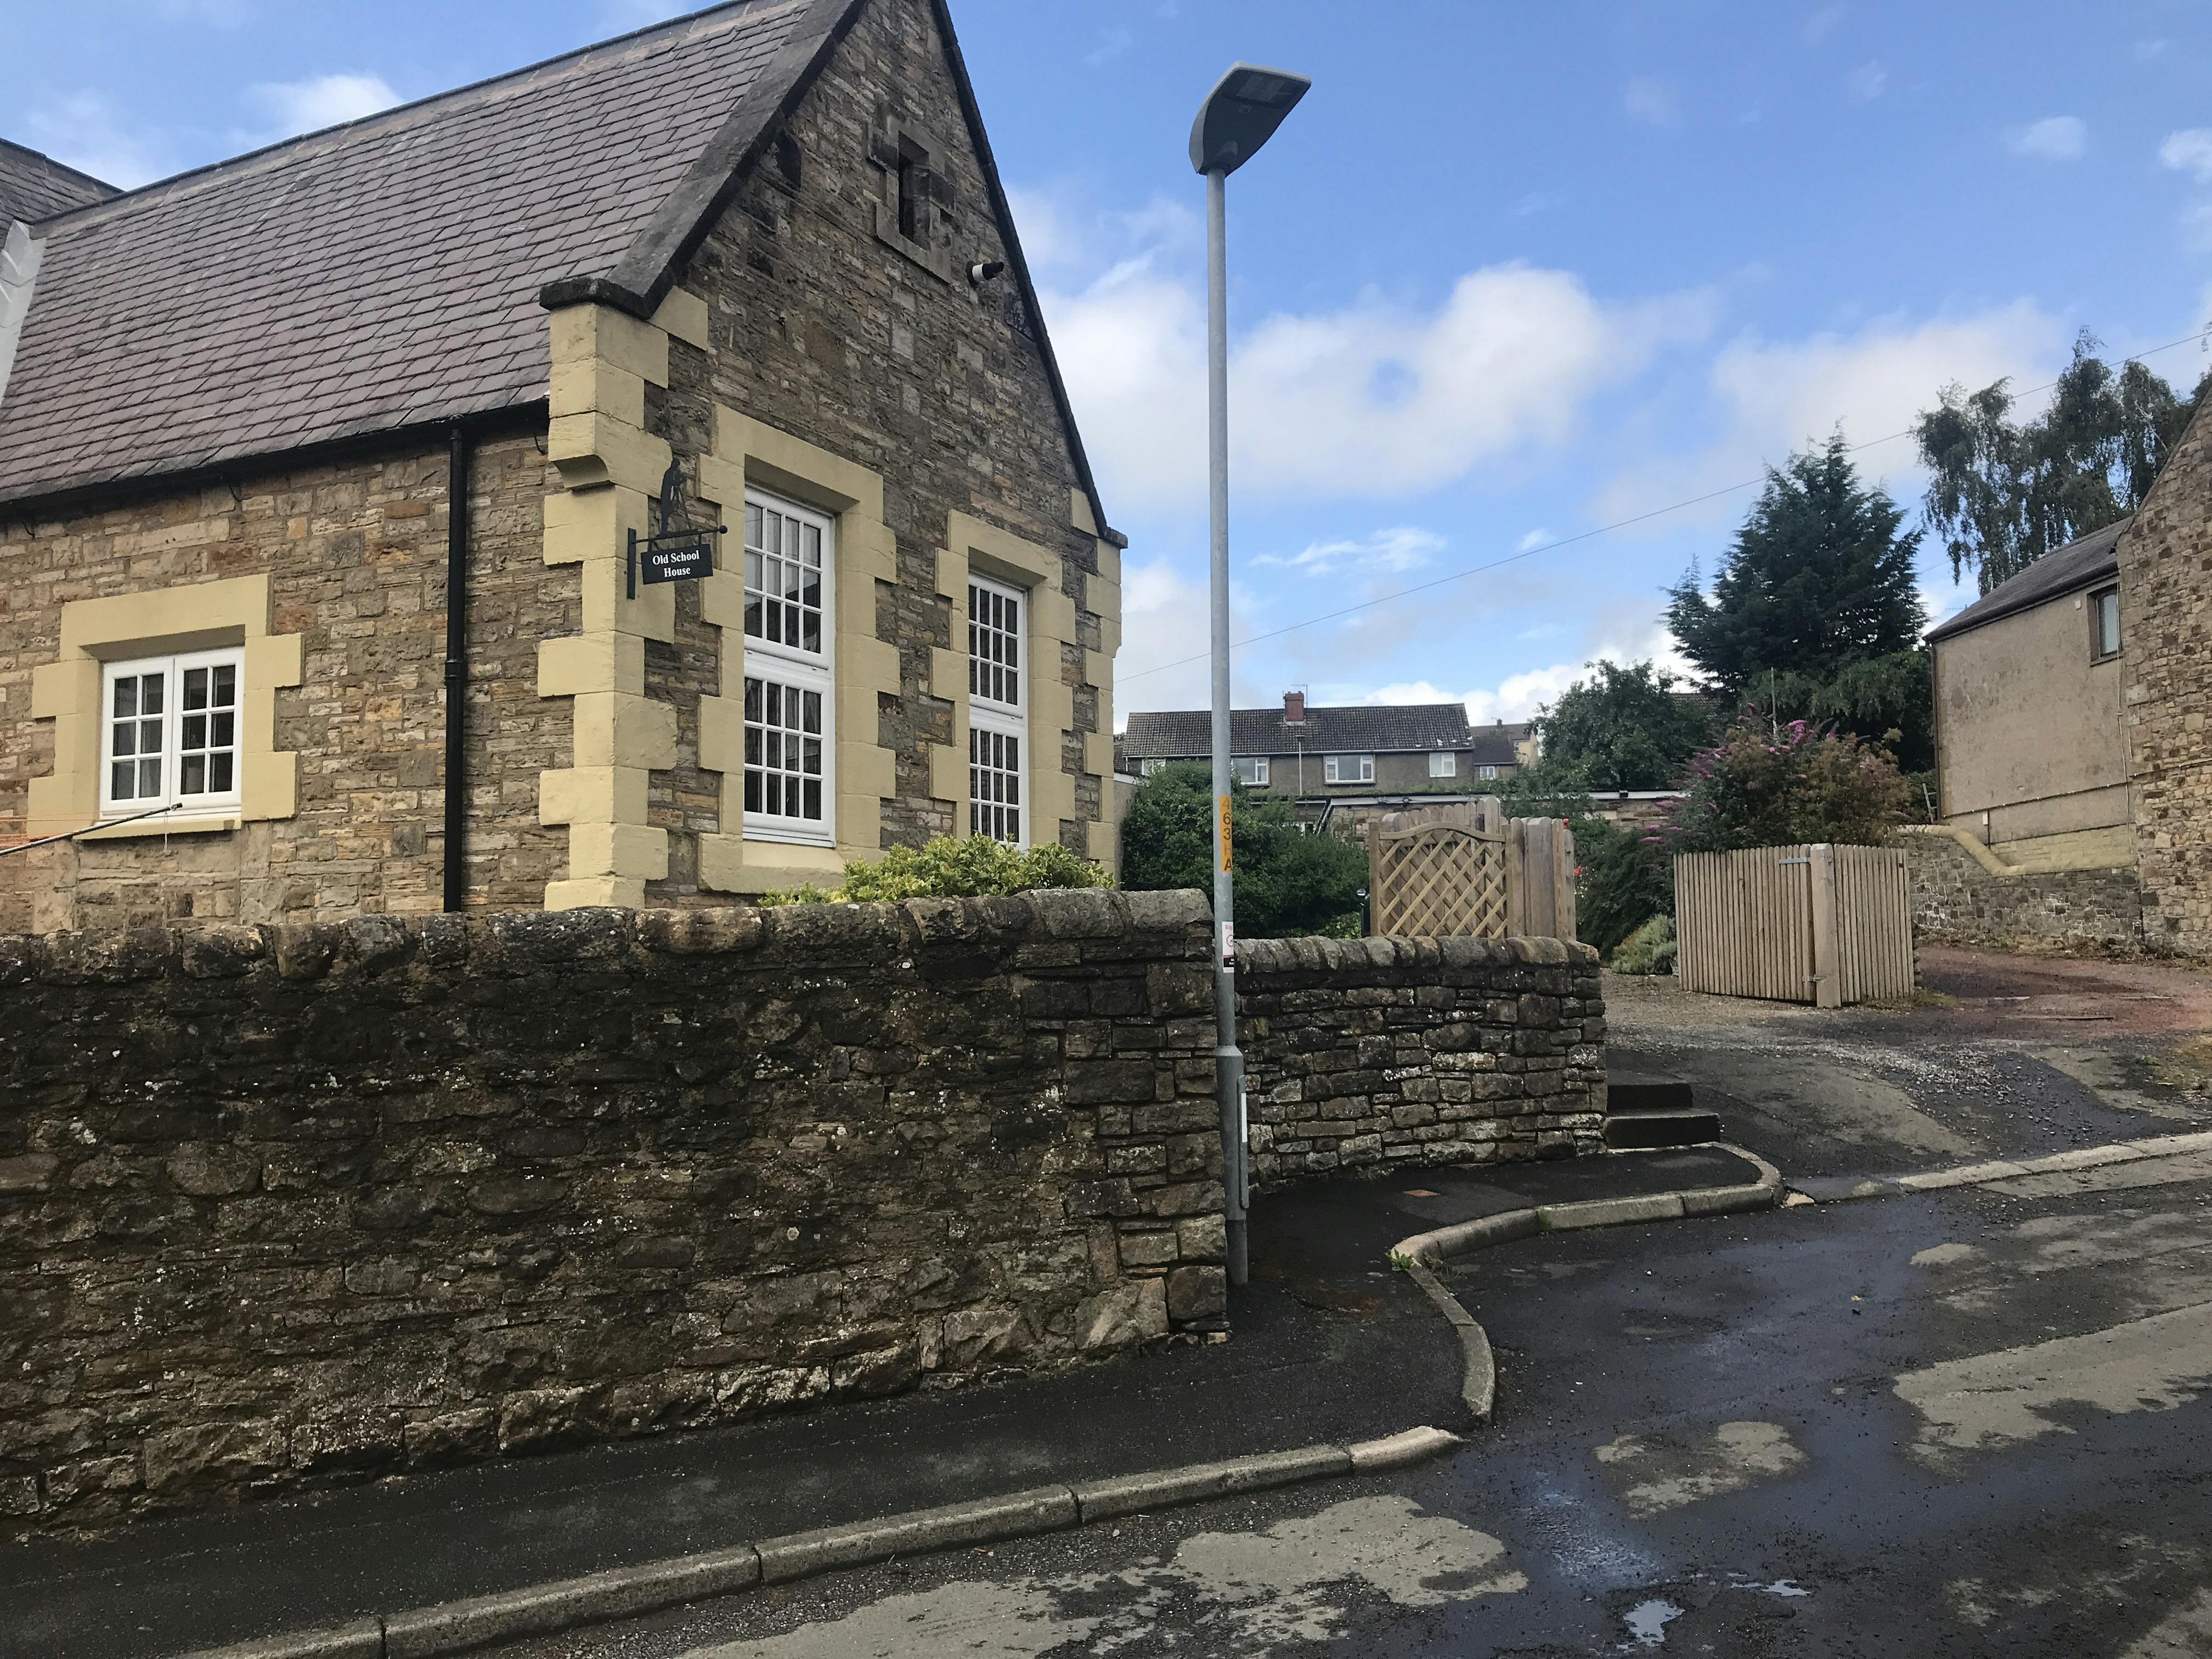 Street view of the Old Schoolhouse Bed and Breakfast in Haltwhistle, Northumberland